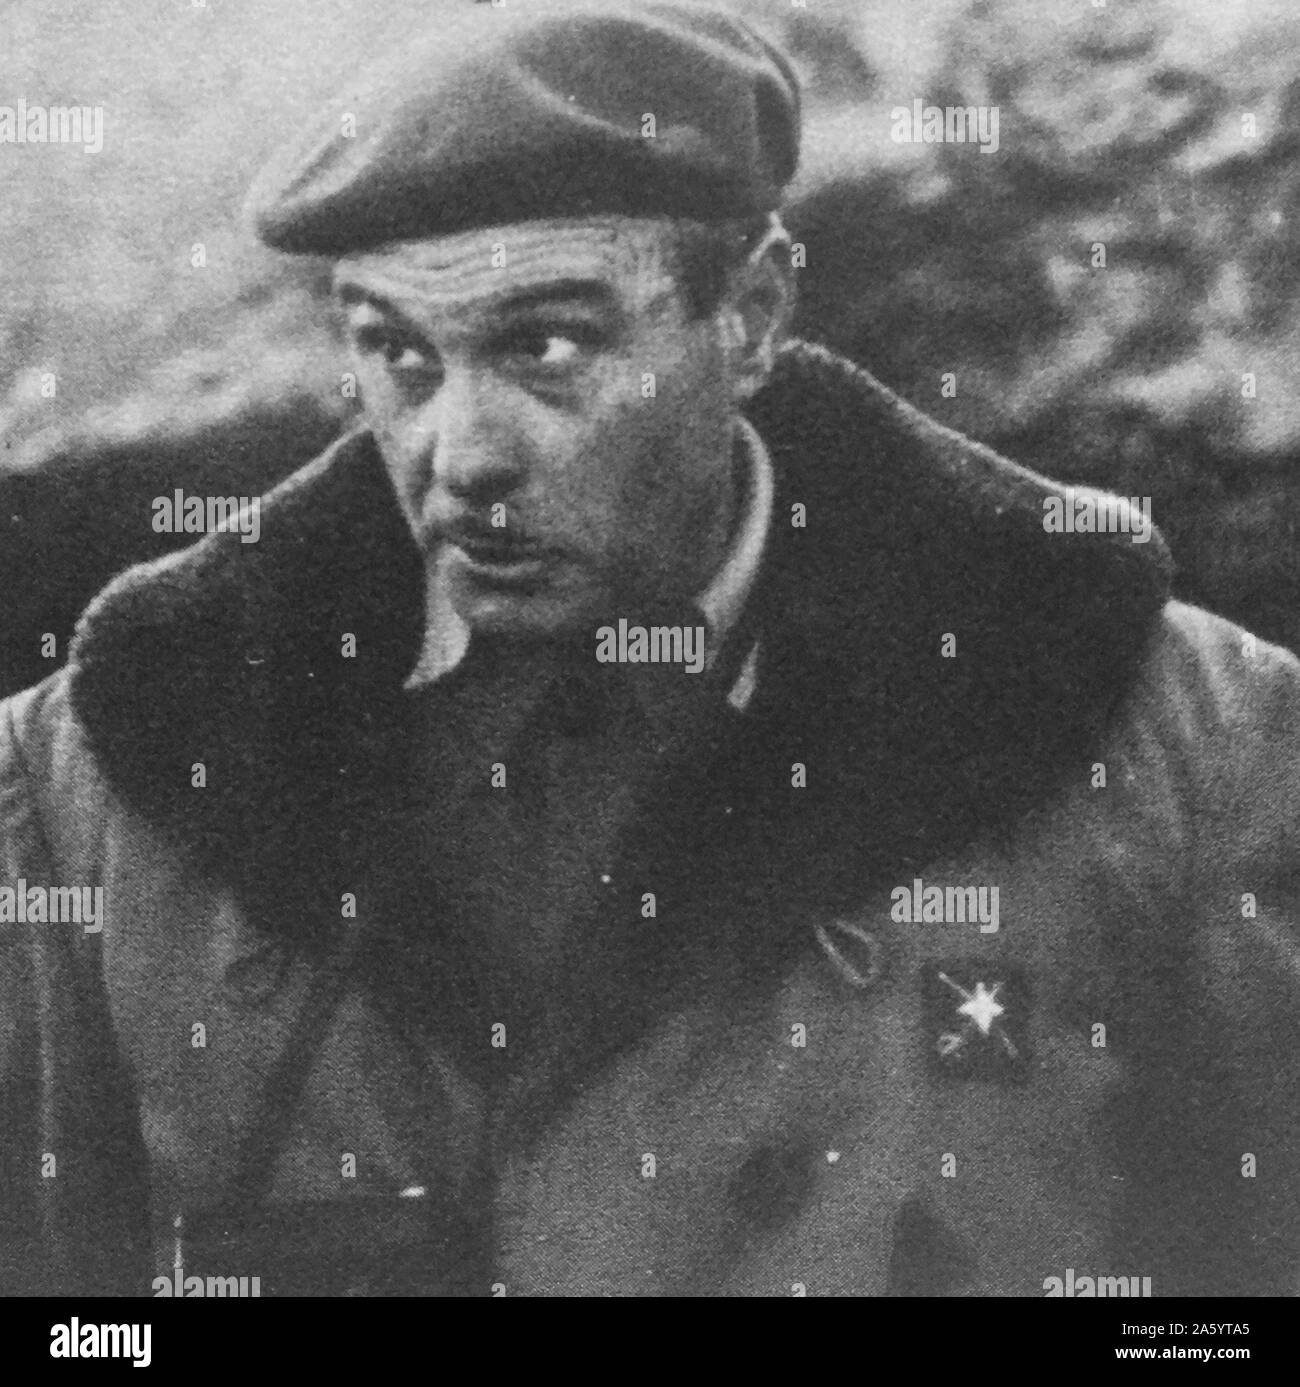 José Solchaga Zala (1881 - 1953) was a Spanish general who fought for the Nationalists in the Spanish Civil War. Stock Photo